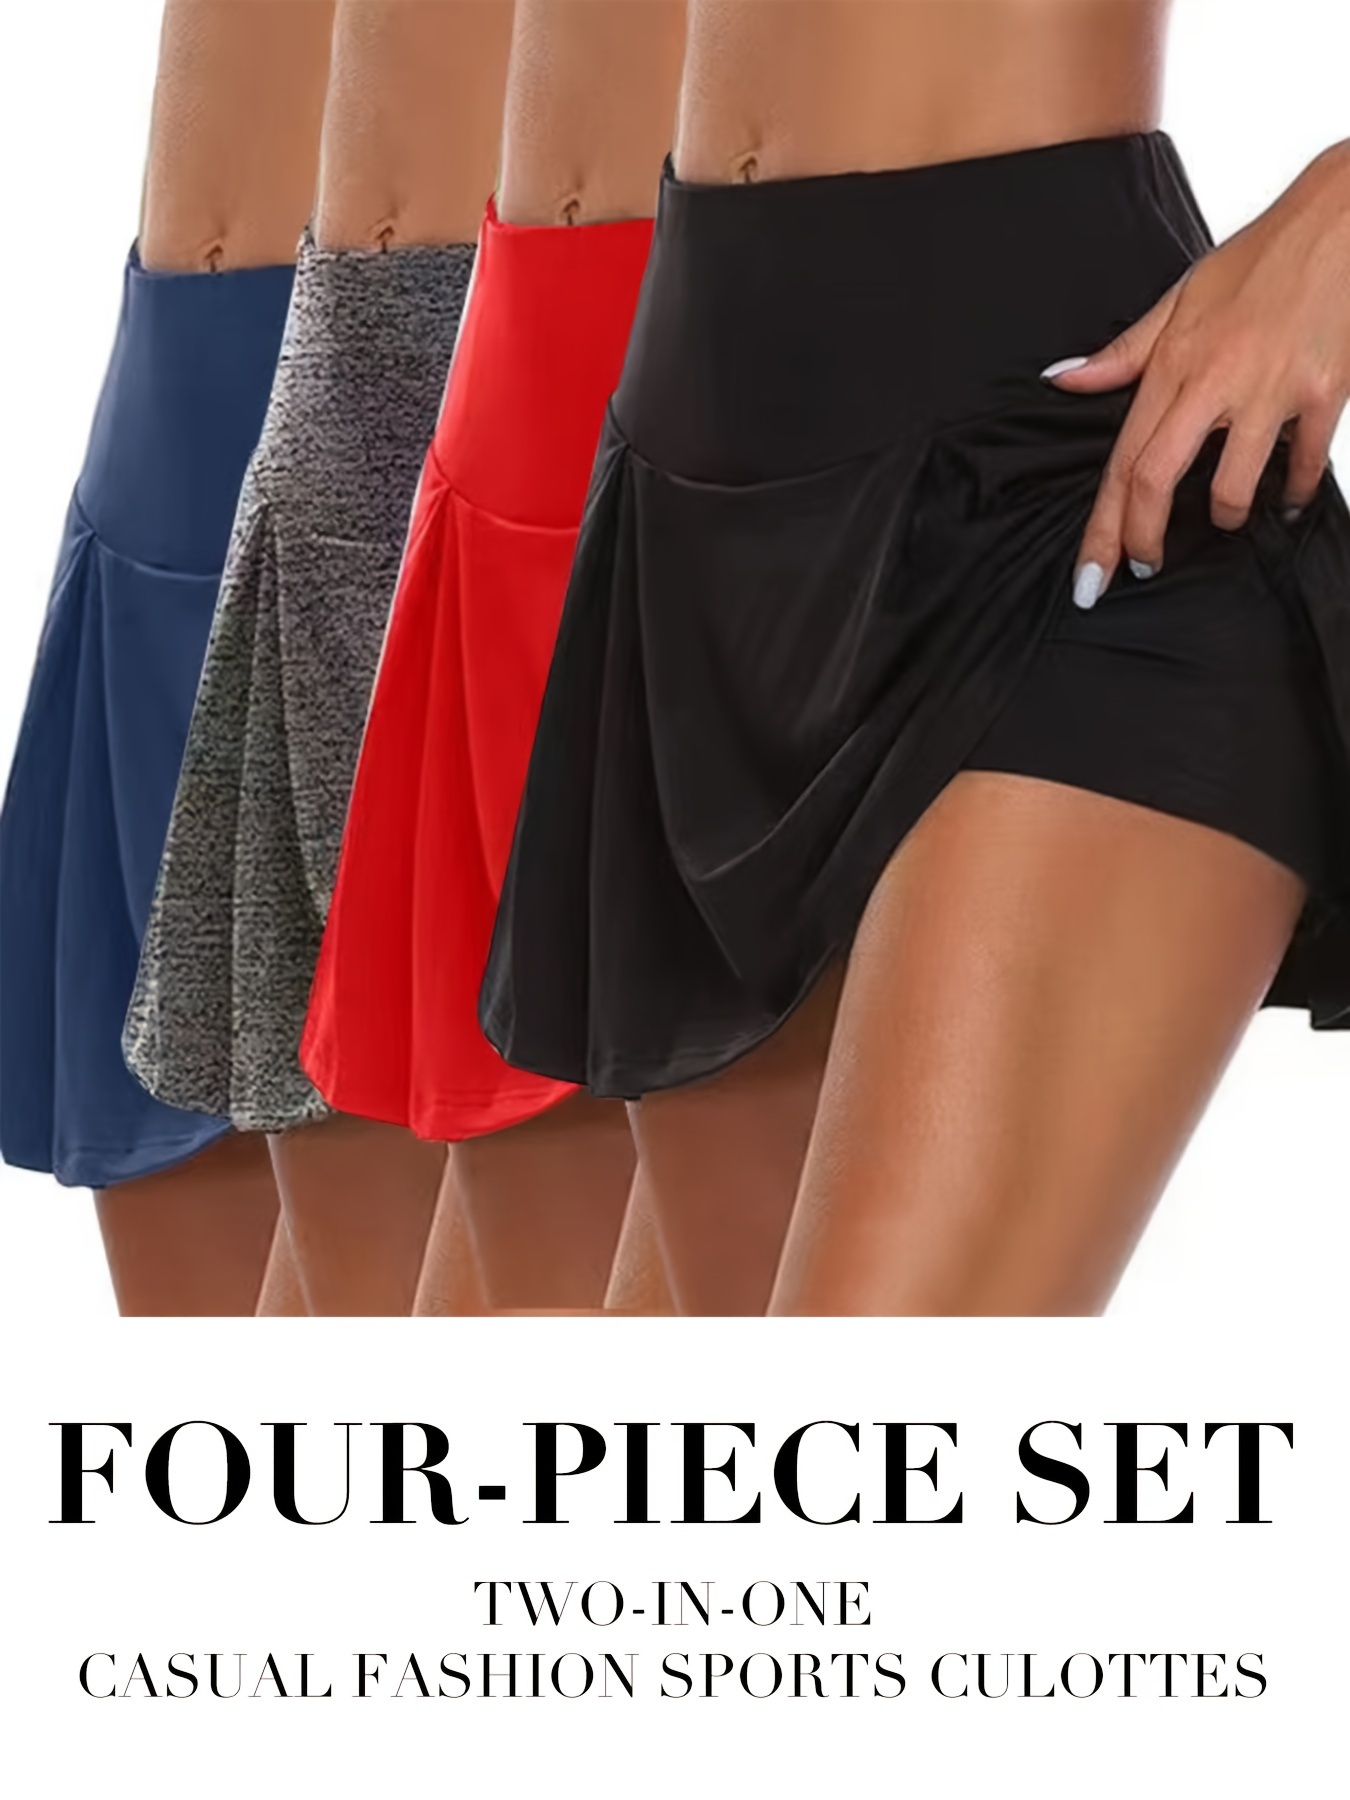 Women's Tennis Skirts Rib-Knit Side Tie Stretch Workout Mini Golf Skorts  Skirts with Shorts Pockets Activewear 